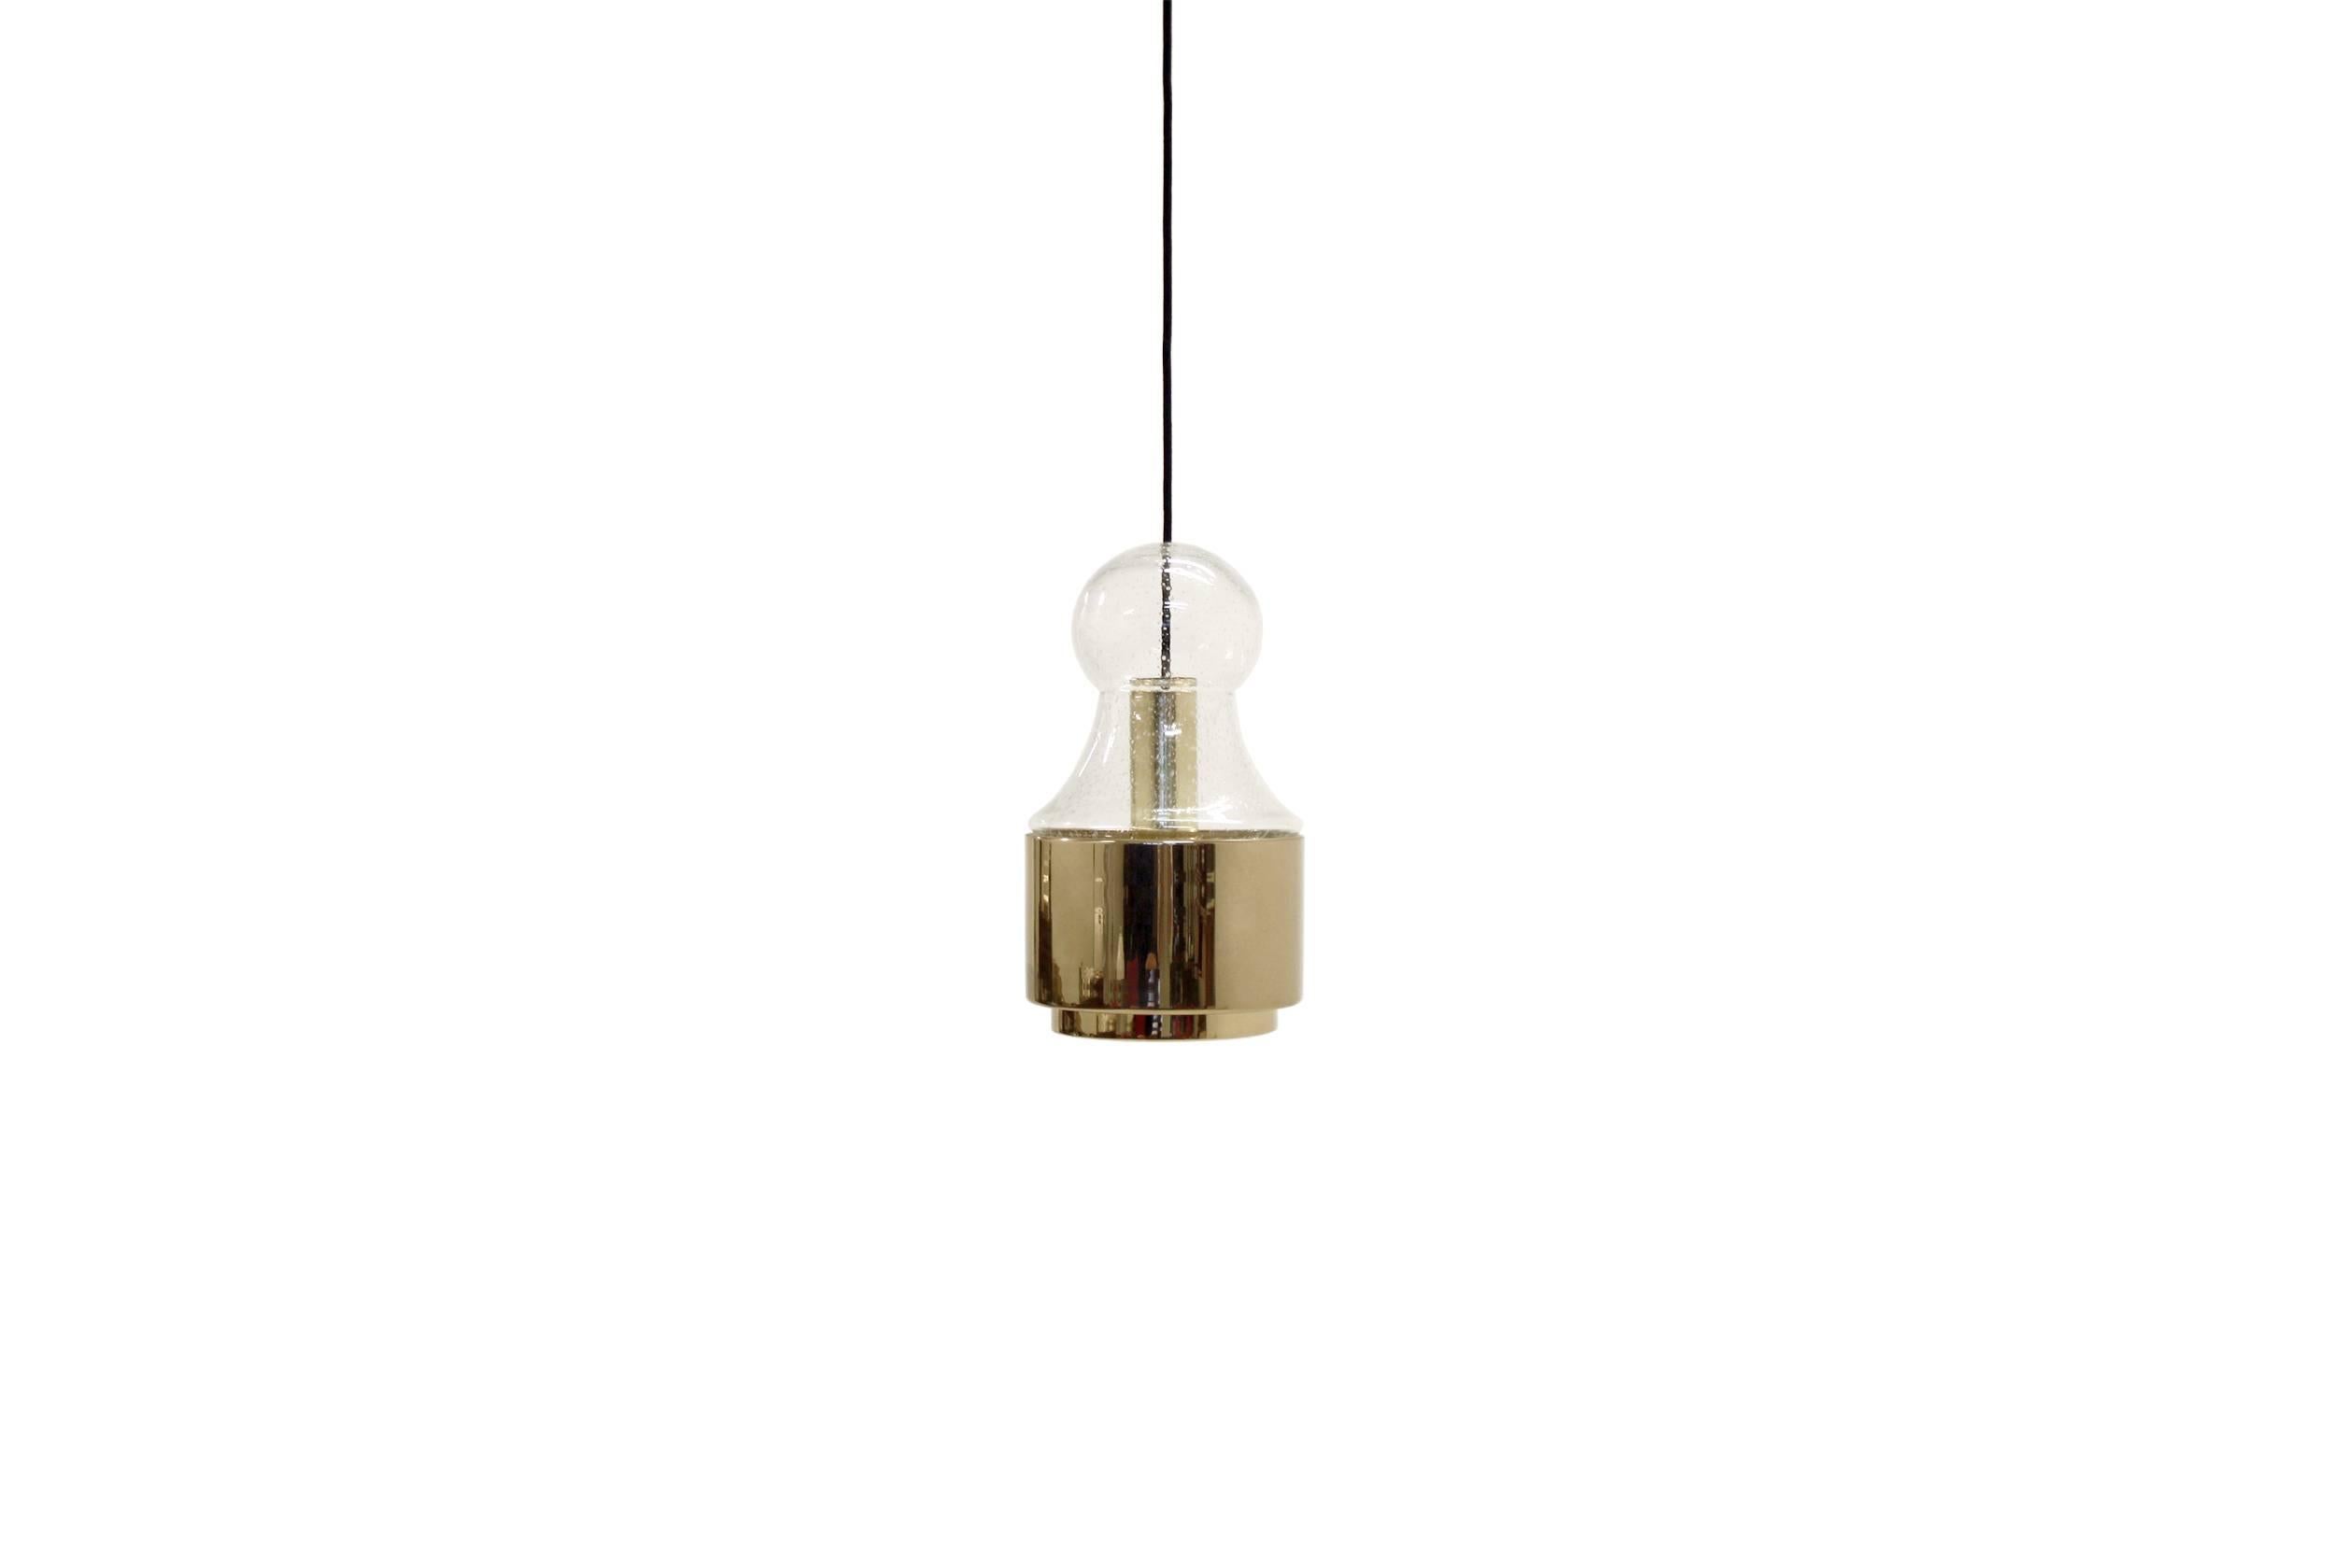 Outstanding ceiling light with a circular brass frame and bubble glass lamp shade. 

Designed by Jonas Hidle and made by Høvik Lys AS, Norway, circa 1970 second half. The glass shade is probably made by Hadeland Glassverk AS. 

The lamp is fully